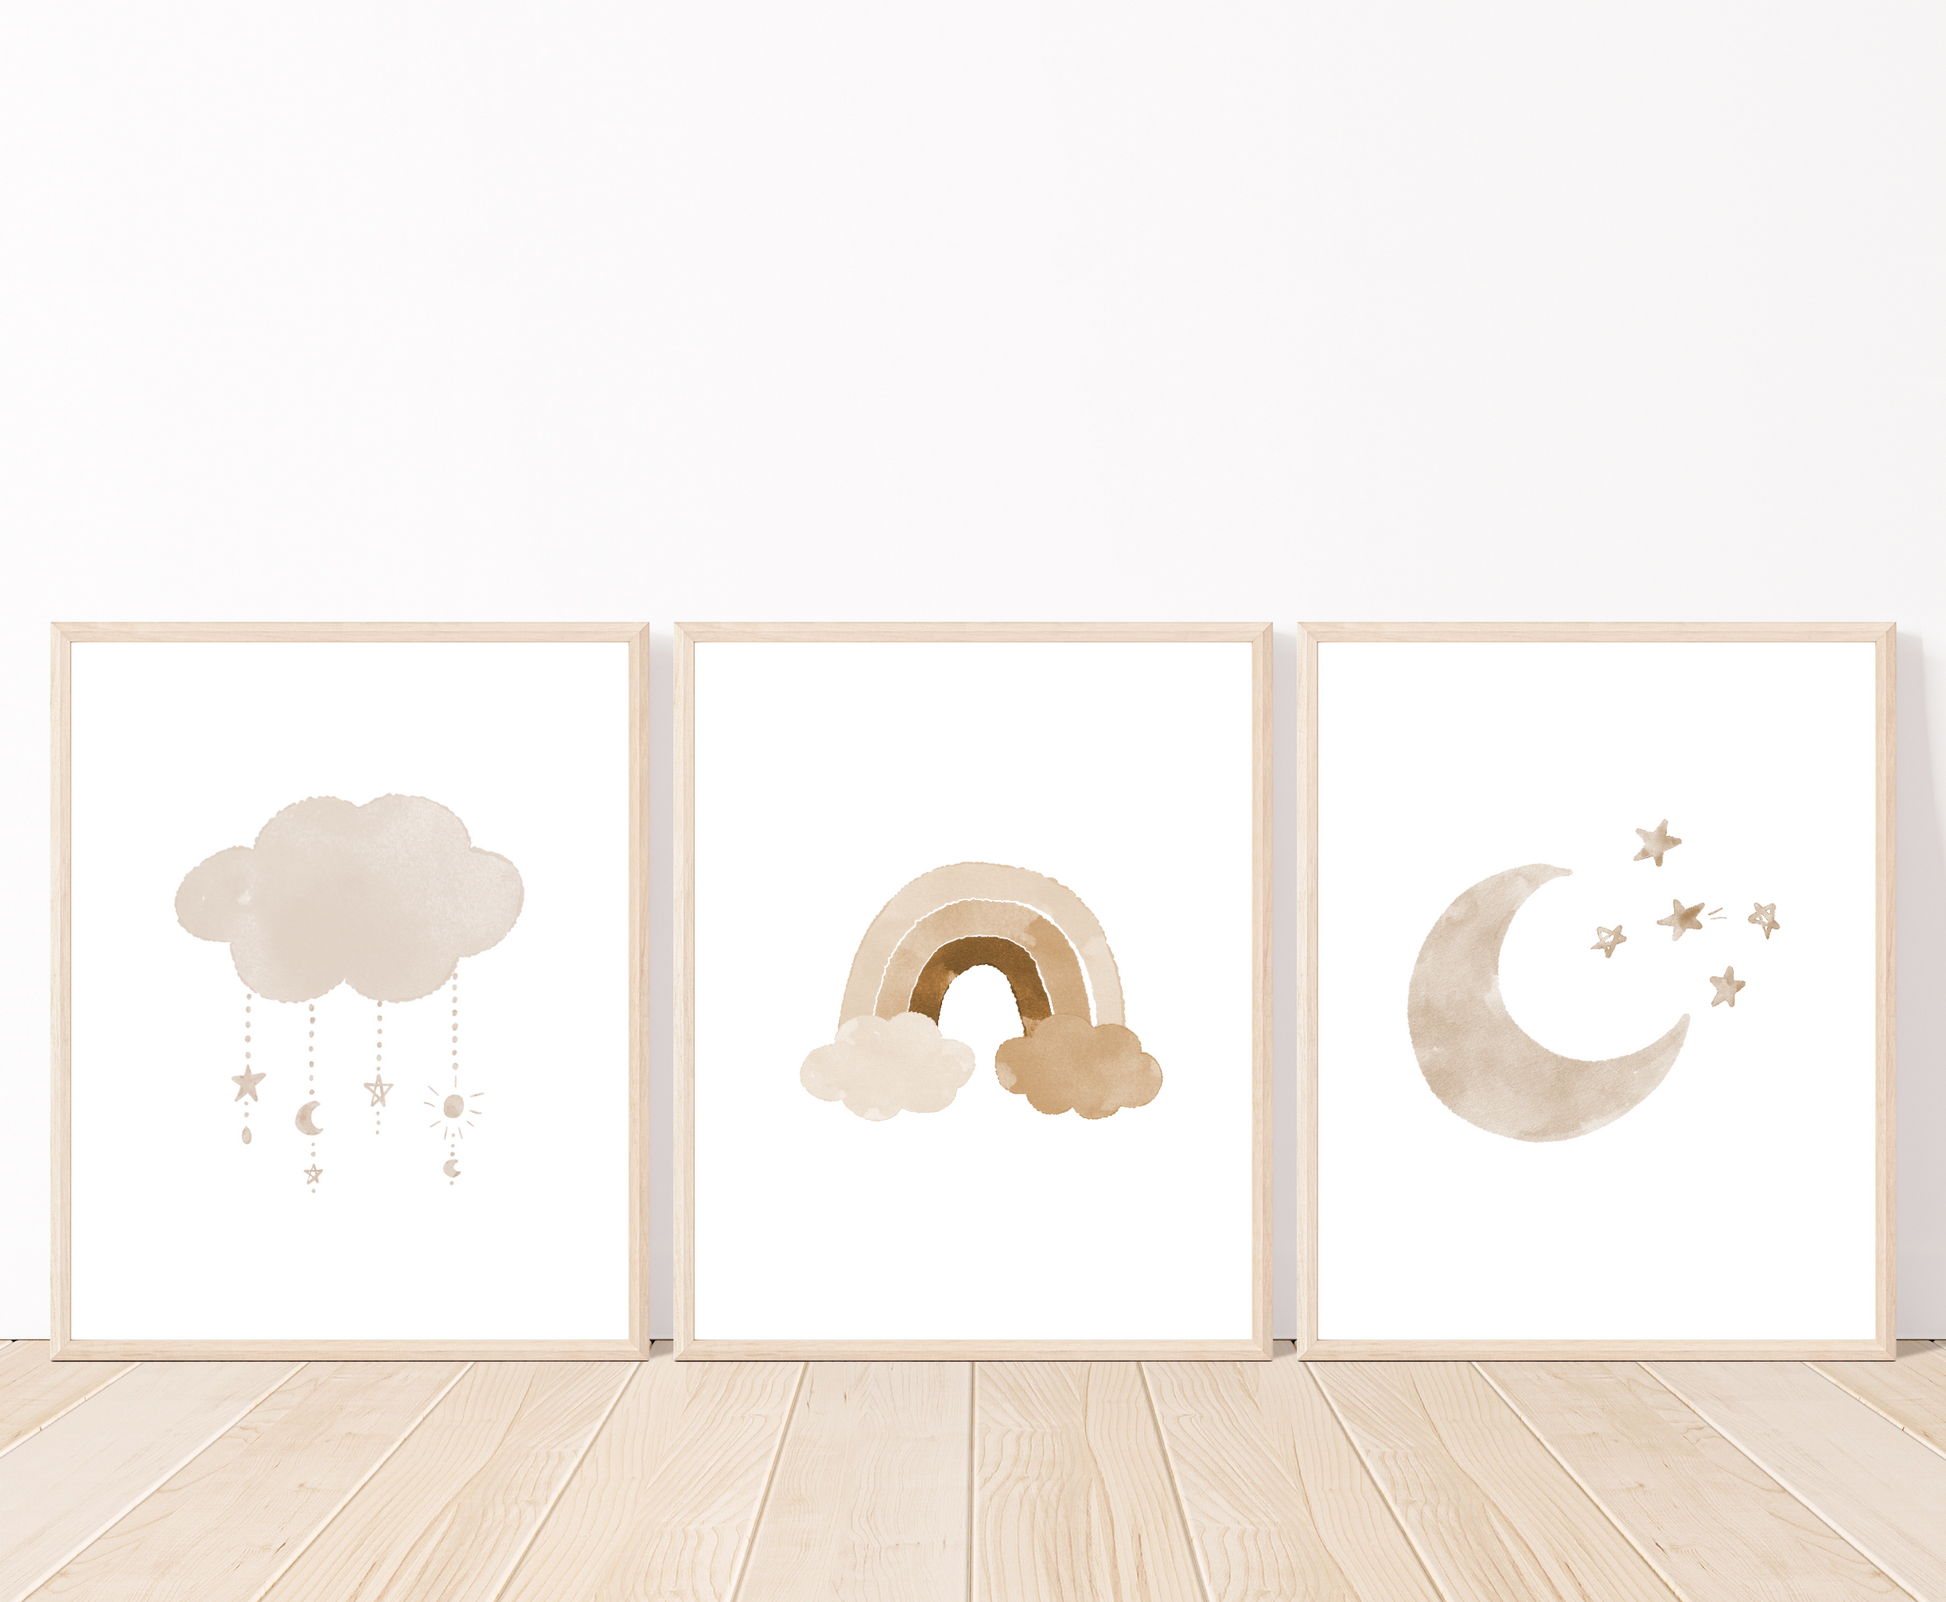 Three digital posters. The first one shows a beige cloud with tiny starts dangling from it, the middle one shows a rainbow in different shades of beige behind two clouds, and the last one shows a beige crescent with tiny beige stars right beside it.